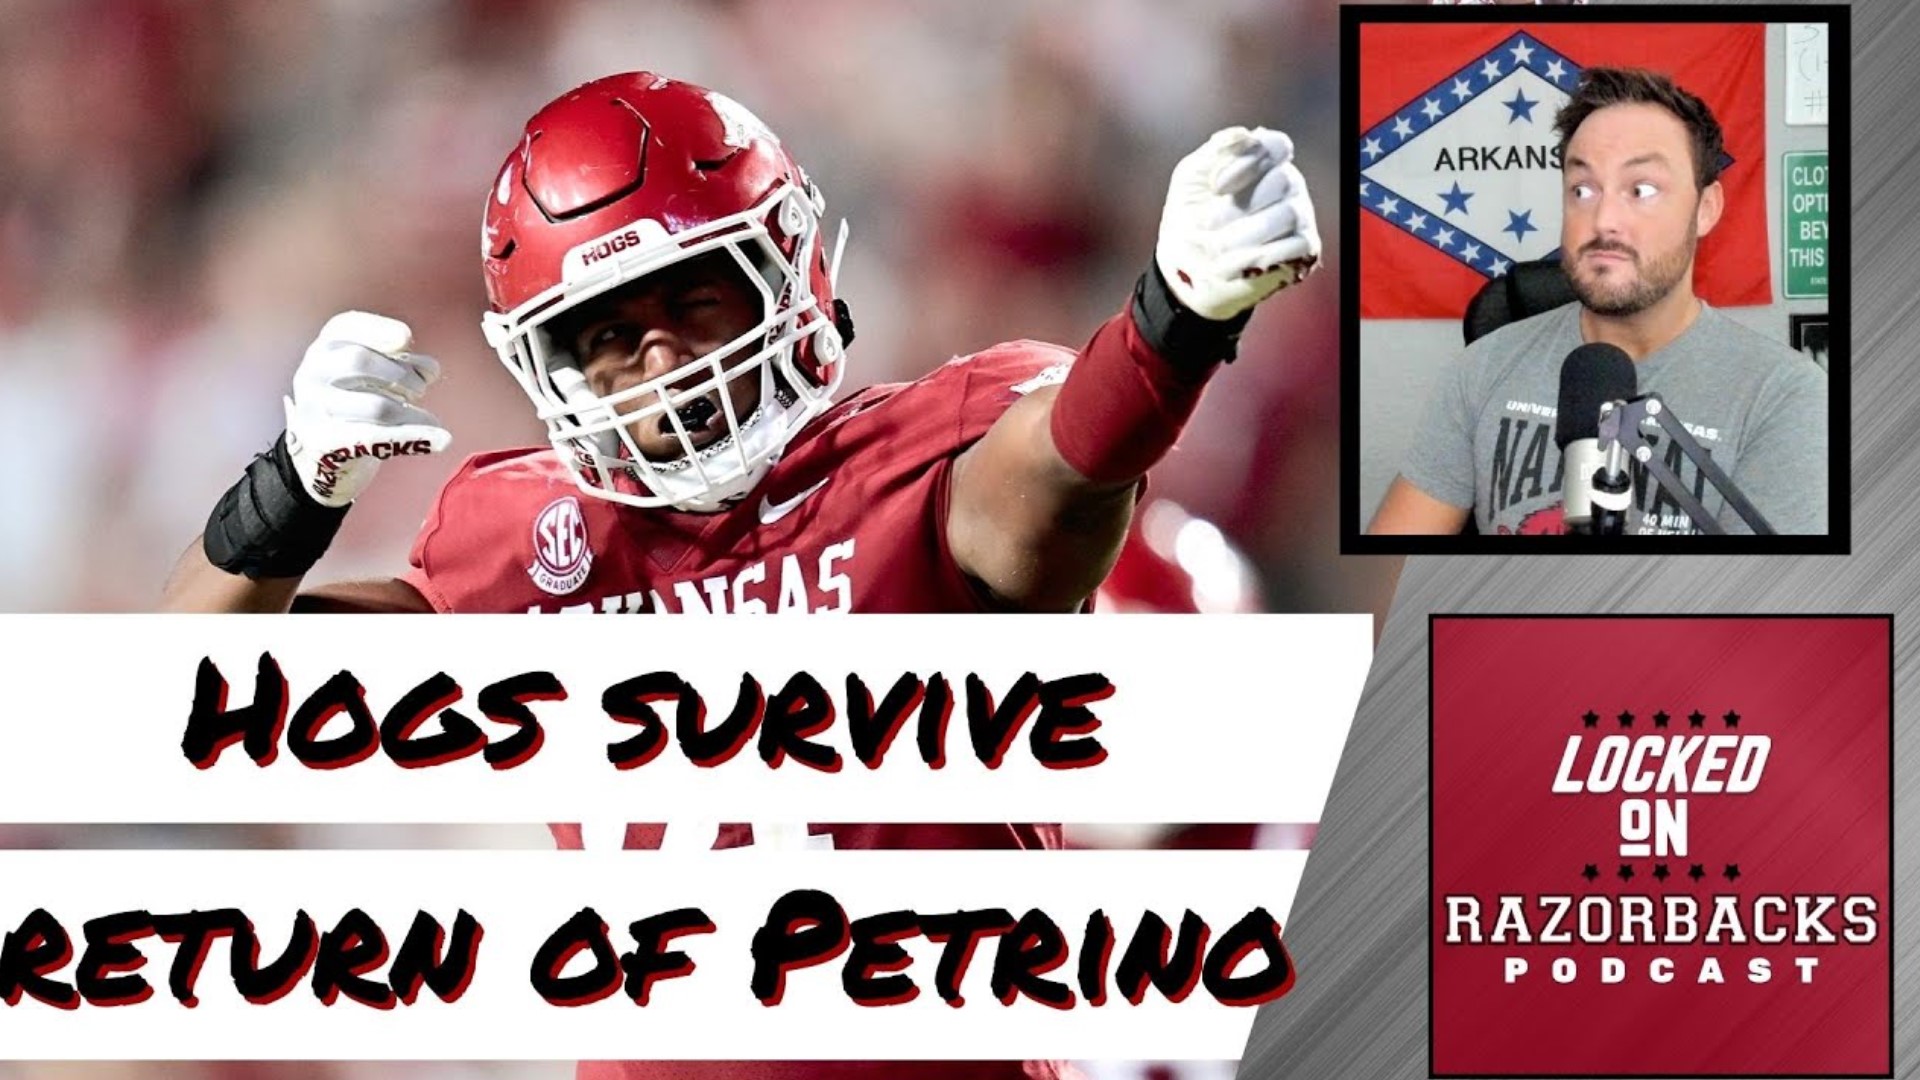 A recap of the Hogs' win over former head coach Bobby Petrino's Missouri State and how the rest of the SEC fared in Week 3.